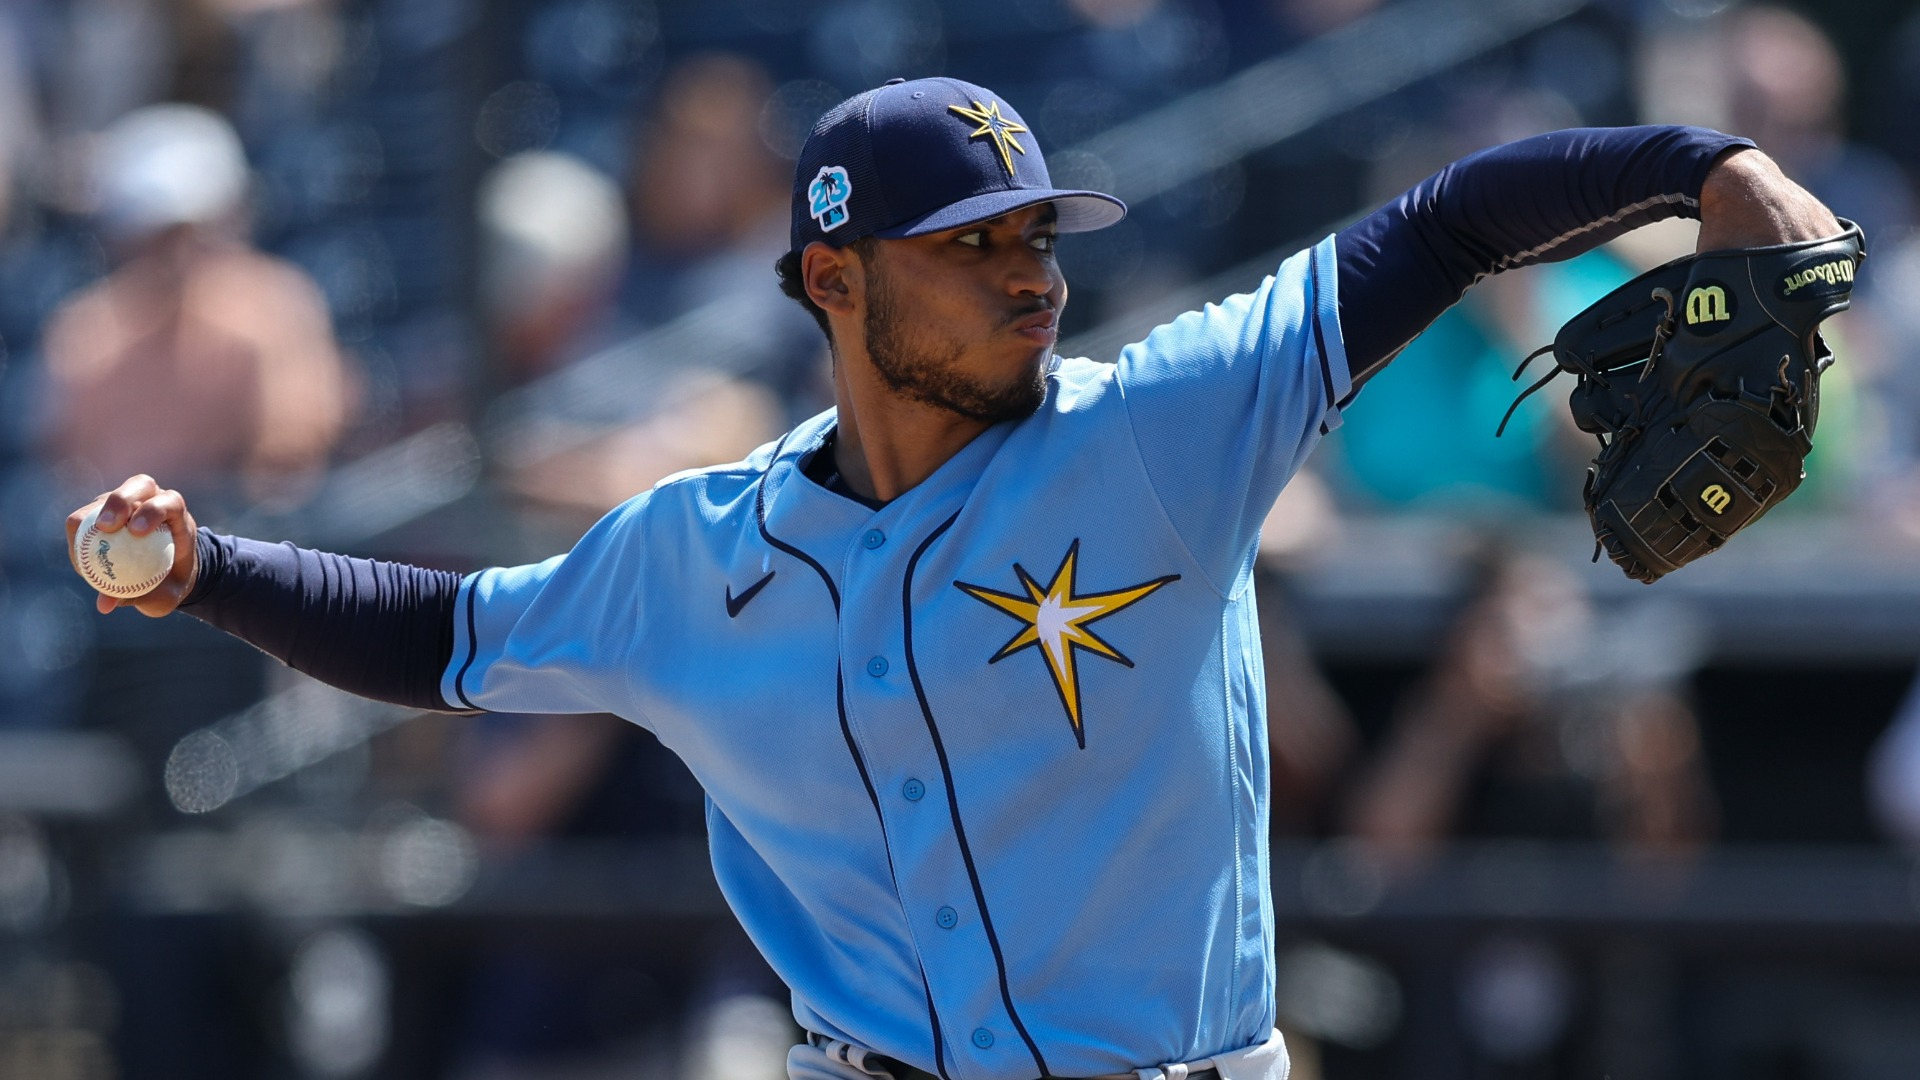 Rays Call Up Top Pitching Prospect To Make MLB Debut Vs. Red Sox